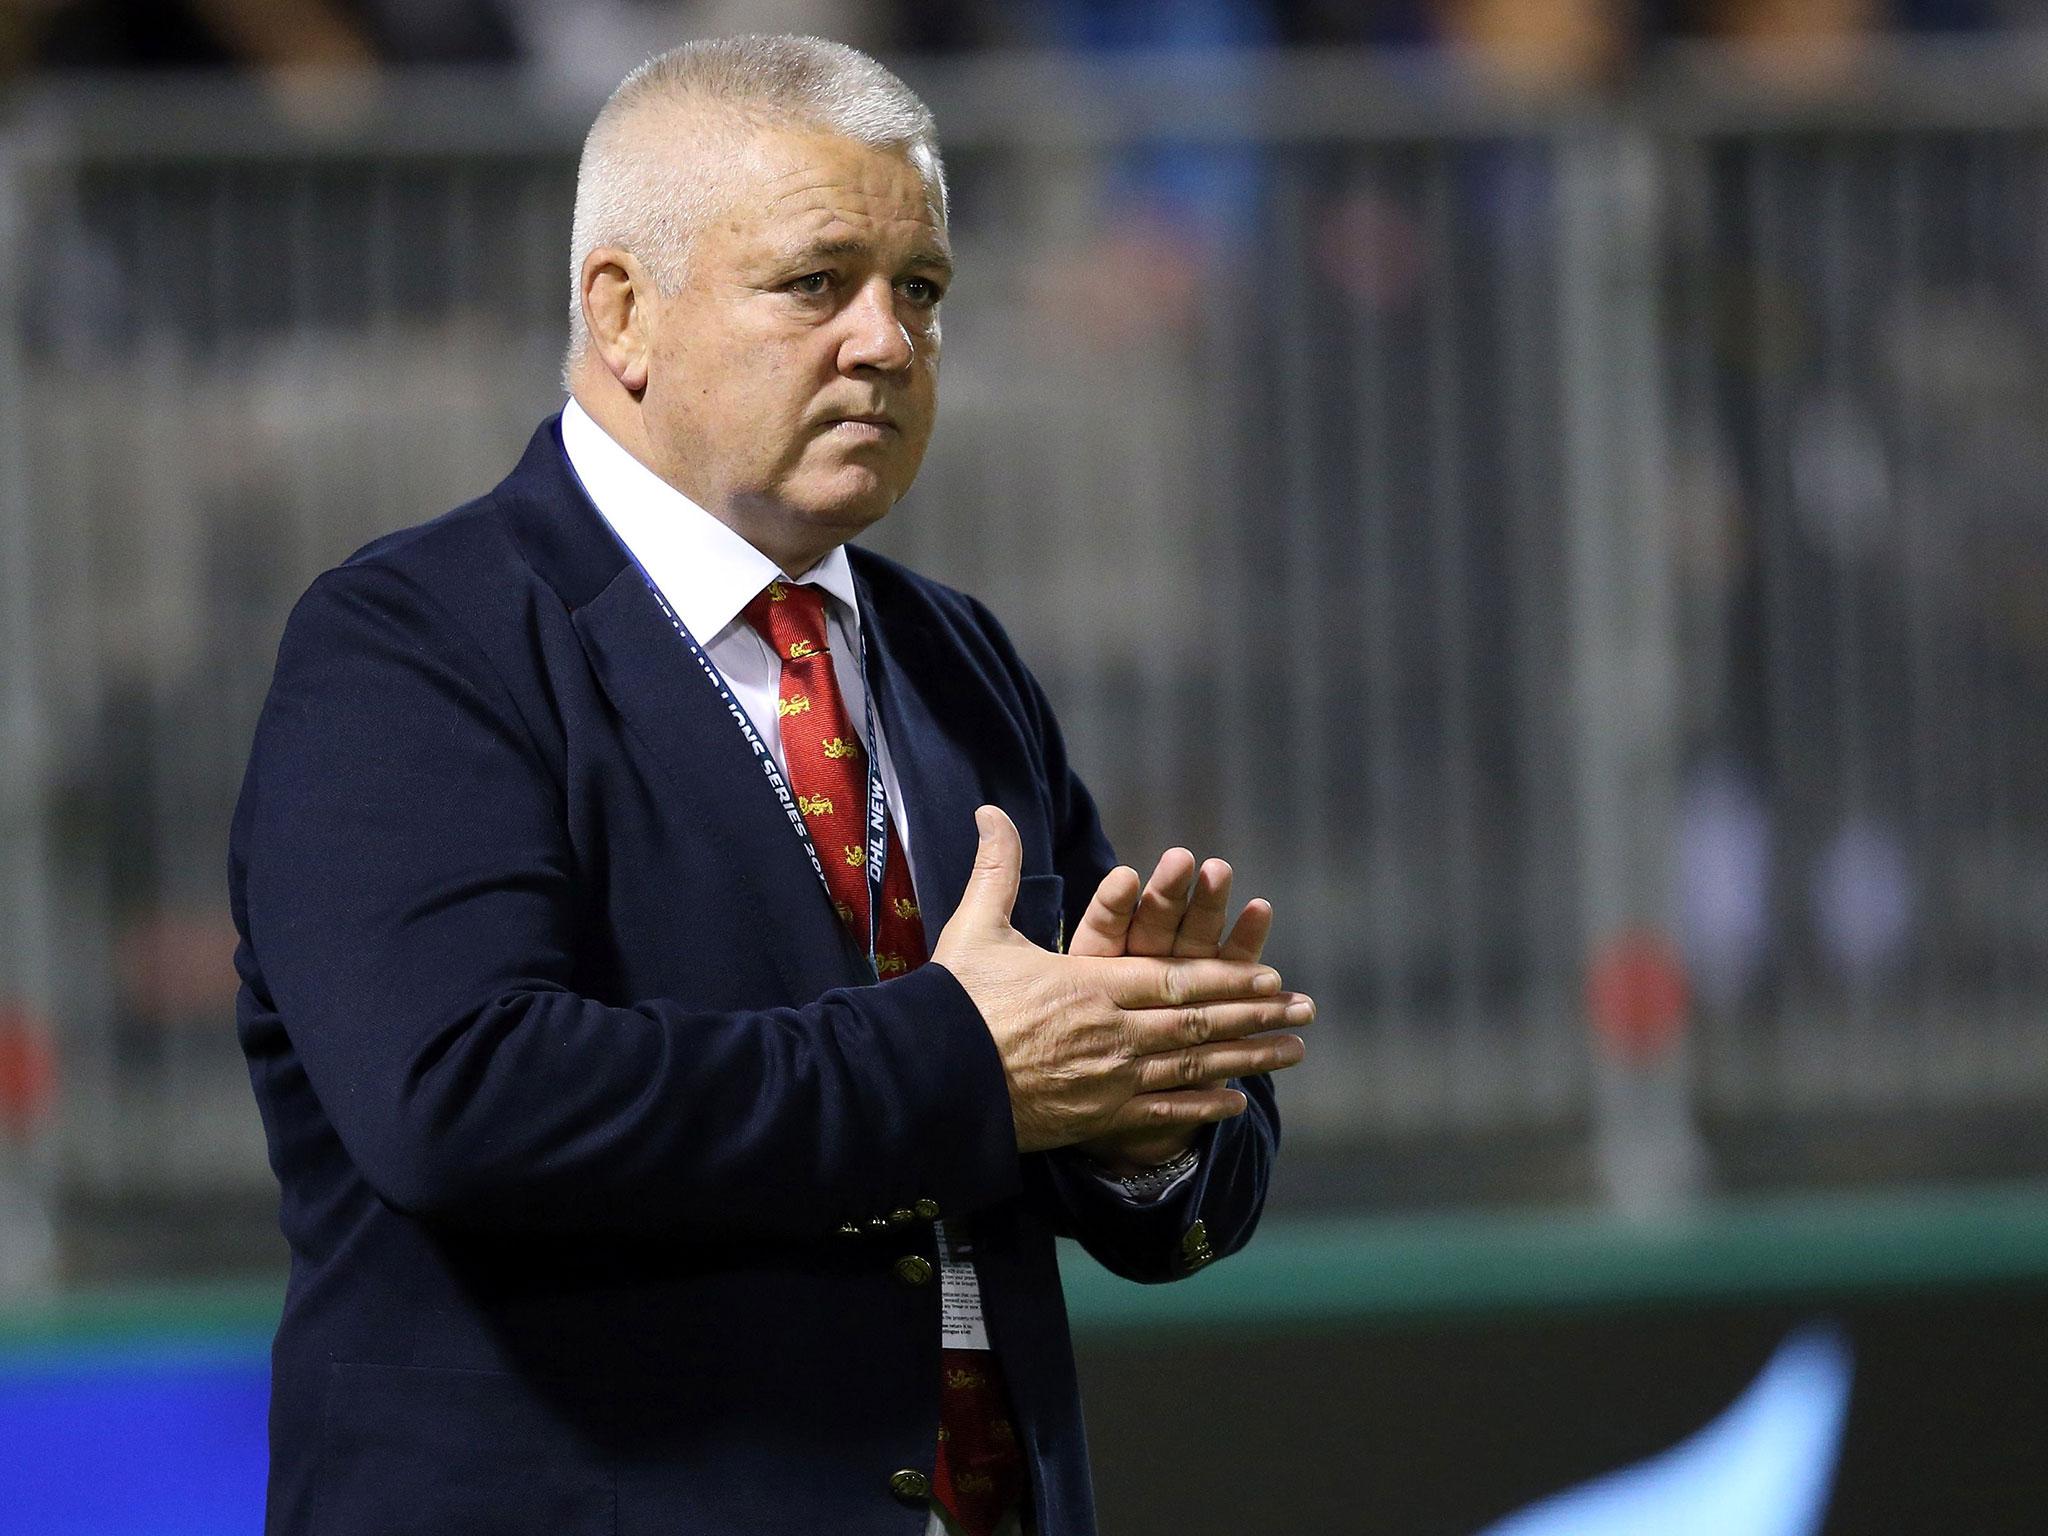 Warren Gatland admitted that his Lions side were off the pace